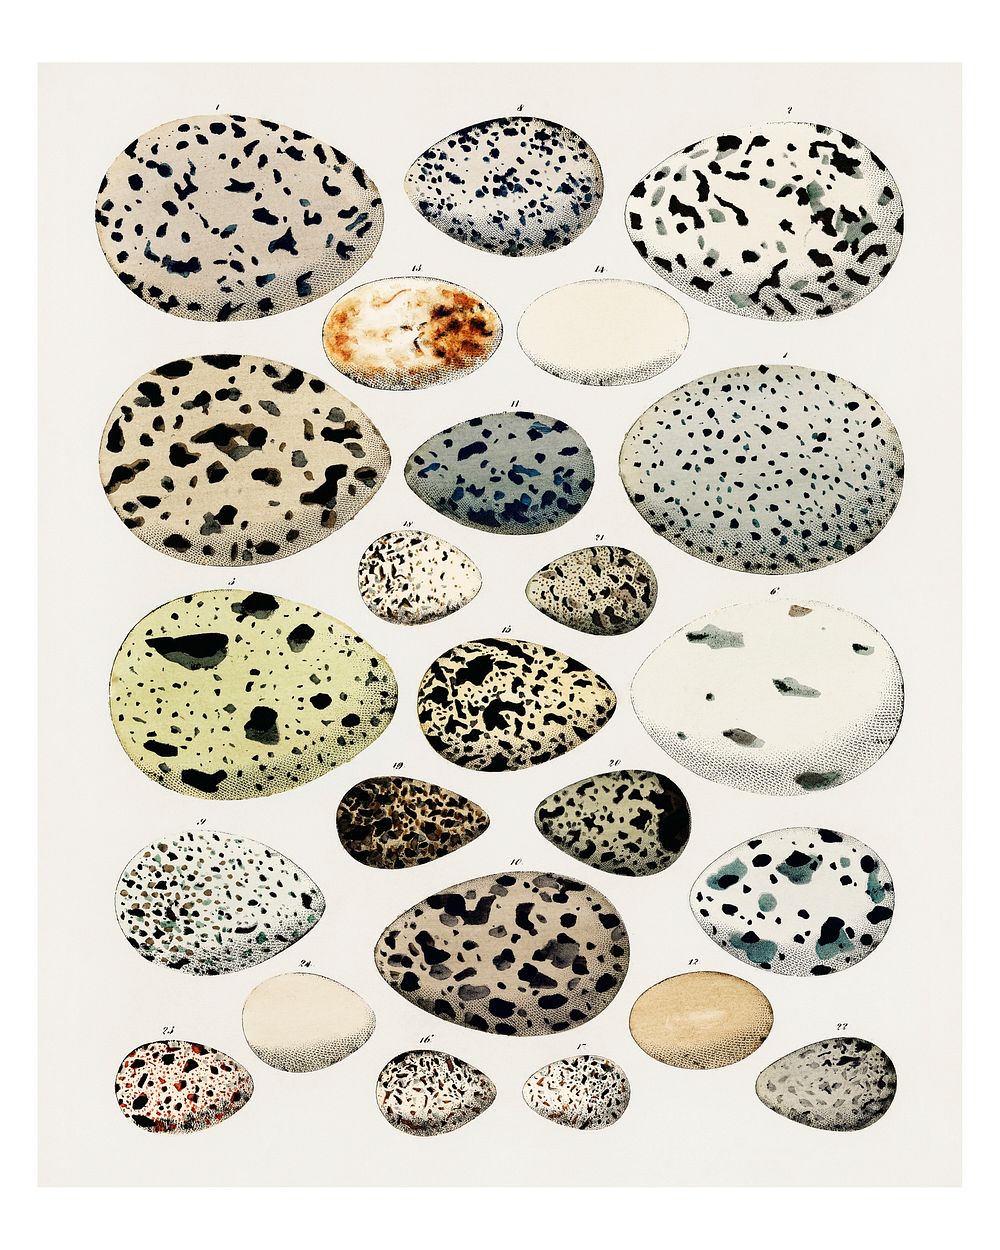 Collection of different eggs of different species of birds vintage illustration by Lorenz Oken.​​​​​ Digitally enhanced by…